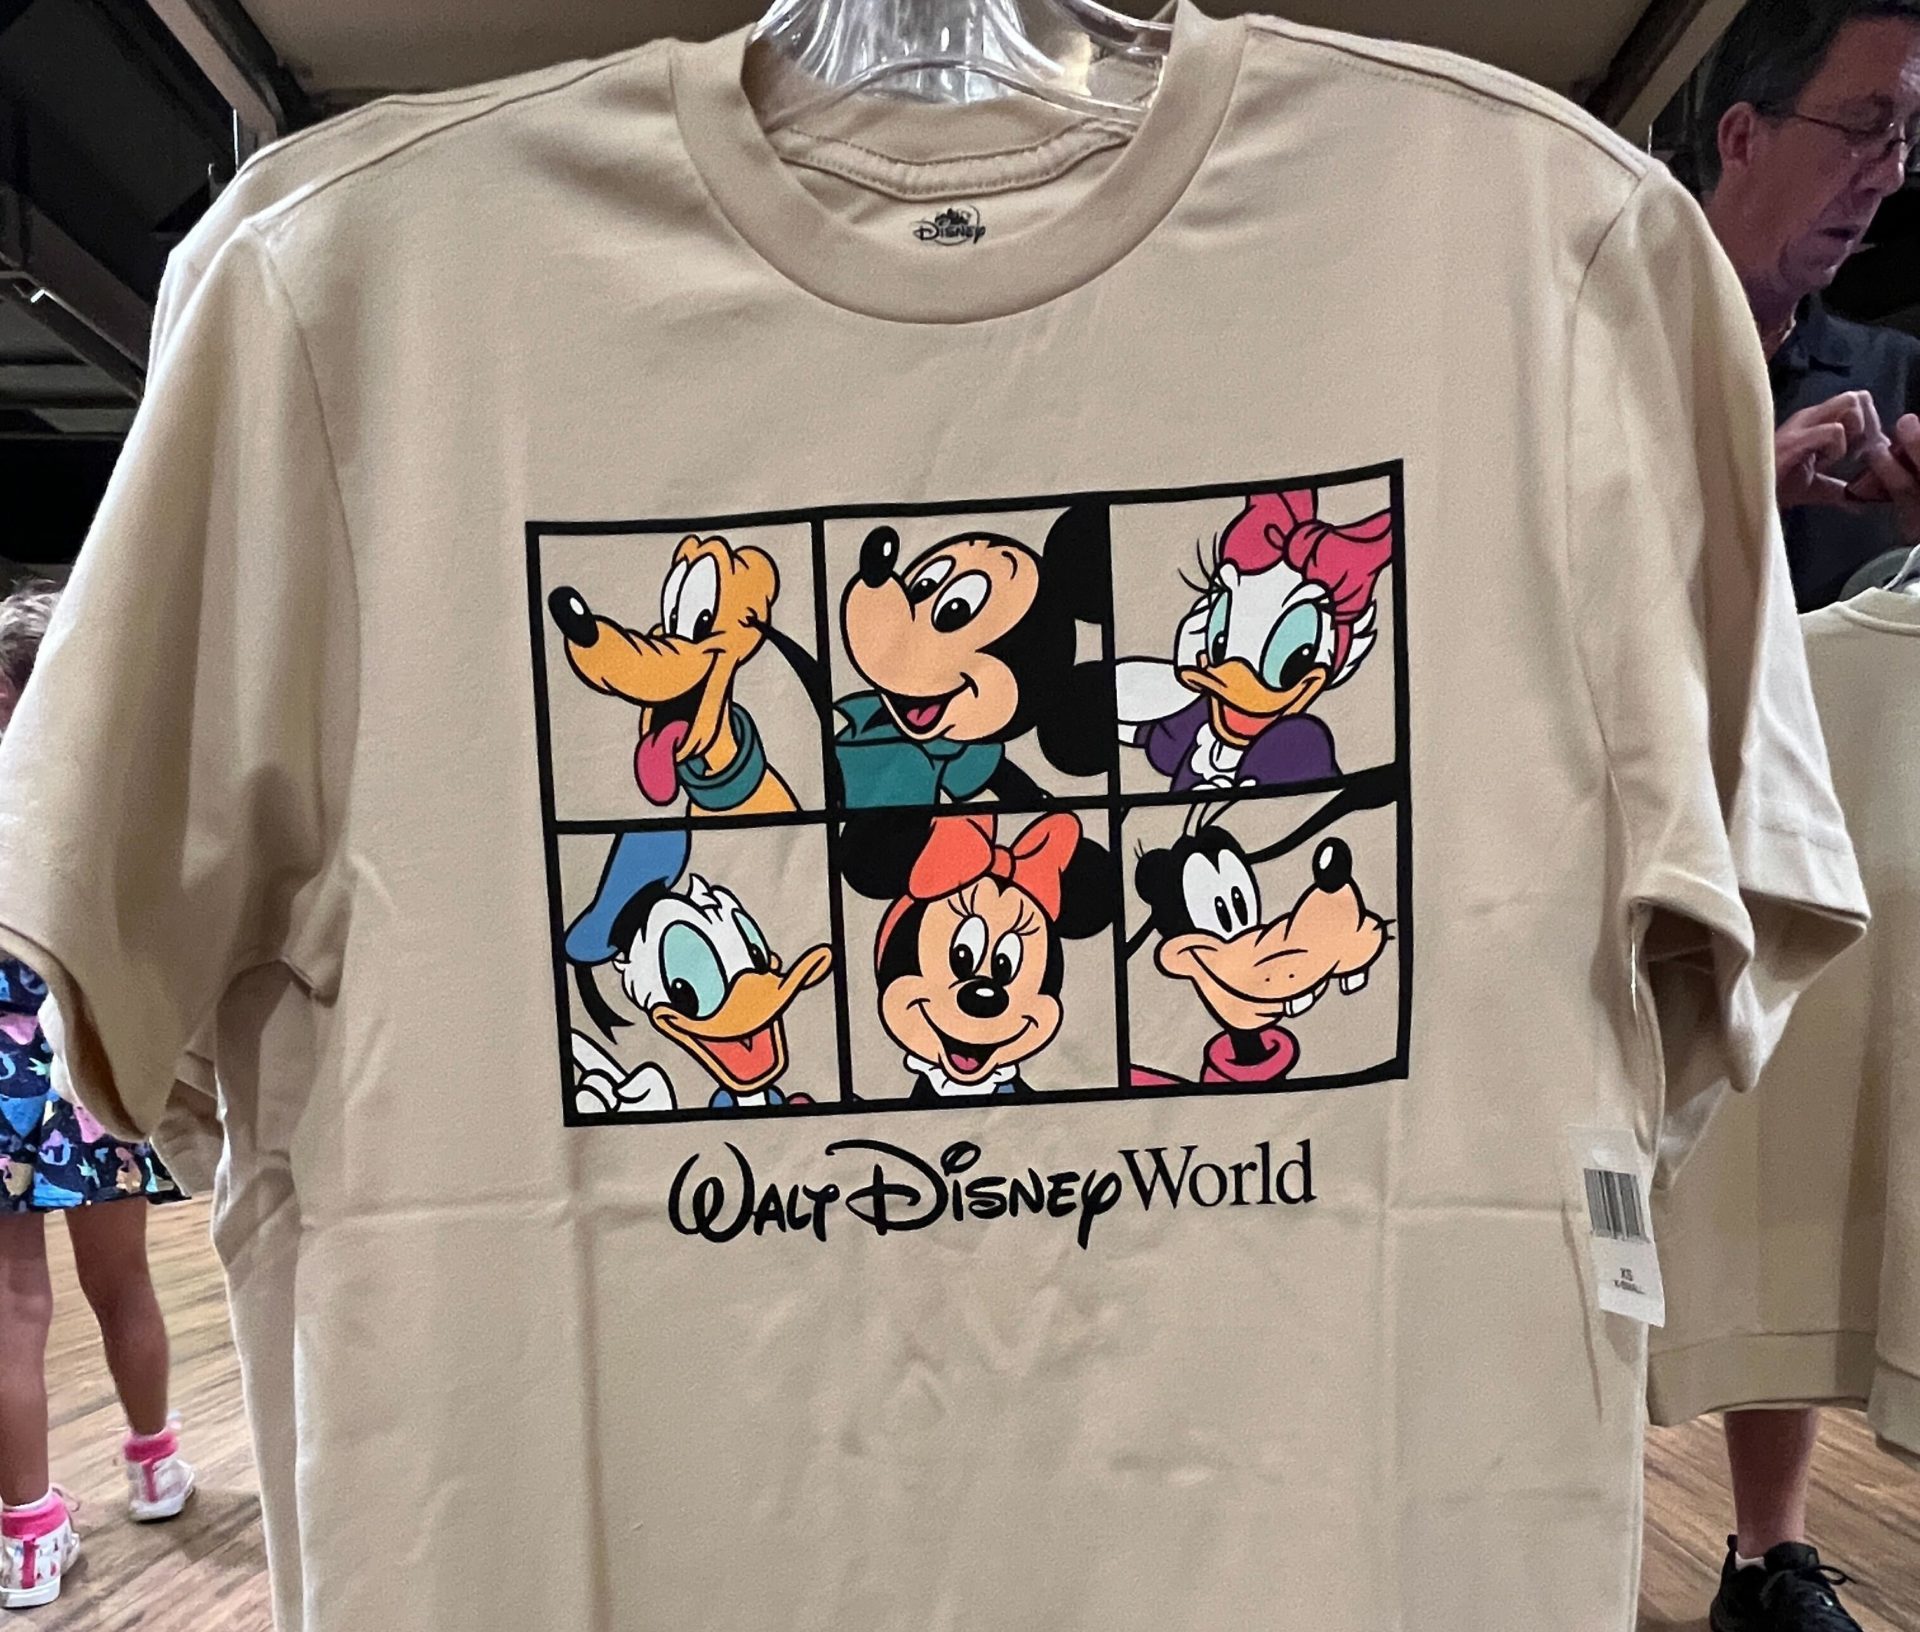 https://mickeyblog.com/wp-content/uploads/2023/06/2023-wdw-Disney-Springs-world-of-Disney-Mickey-and-Friends-Retro-Shirt-3-scaled-e1687359107388.jpg